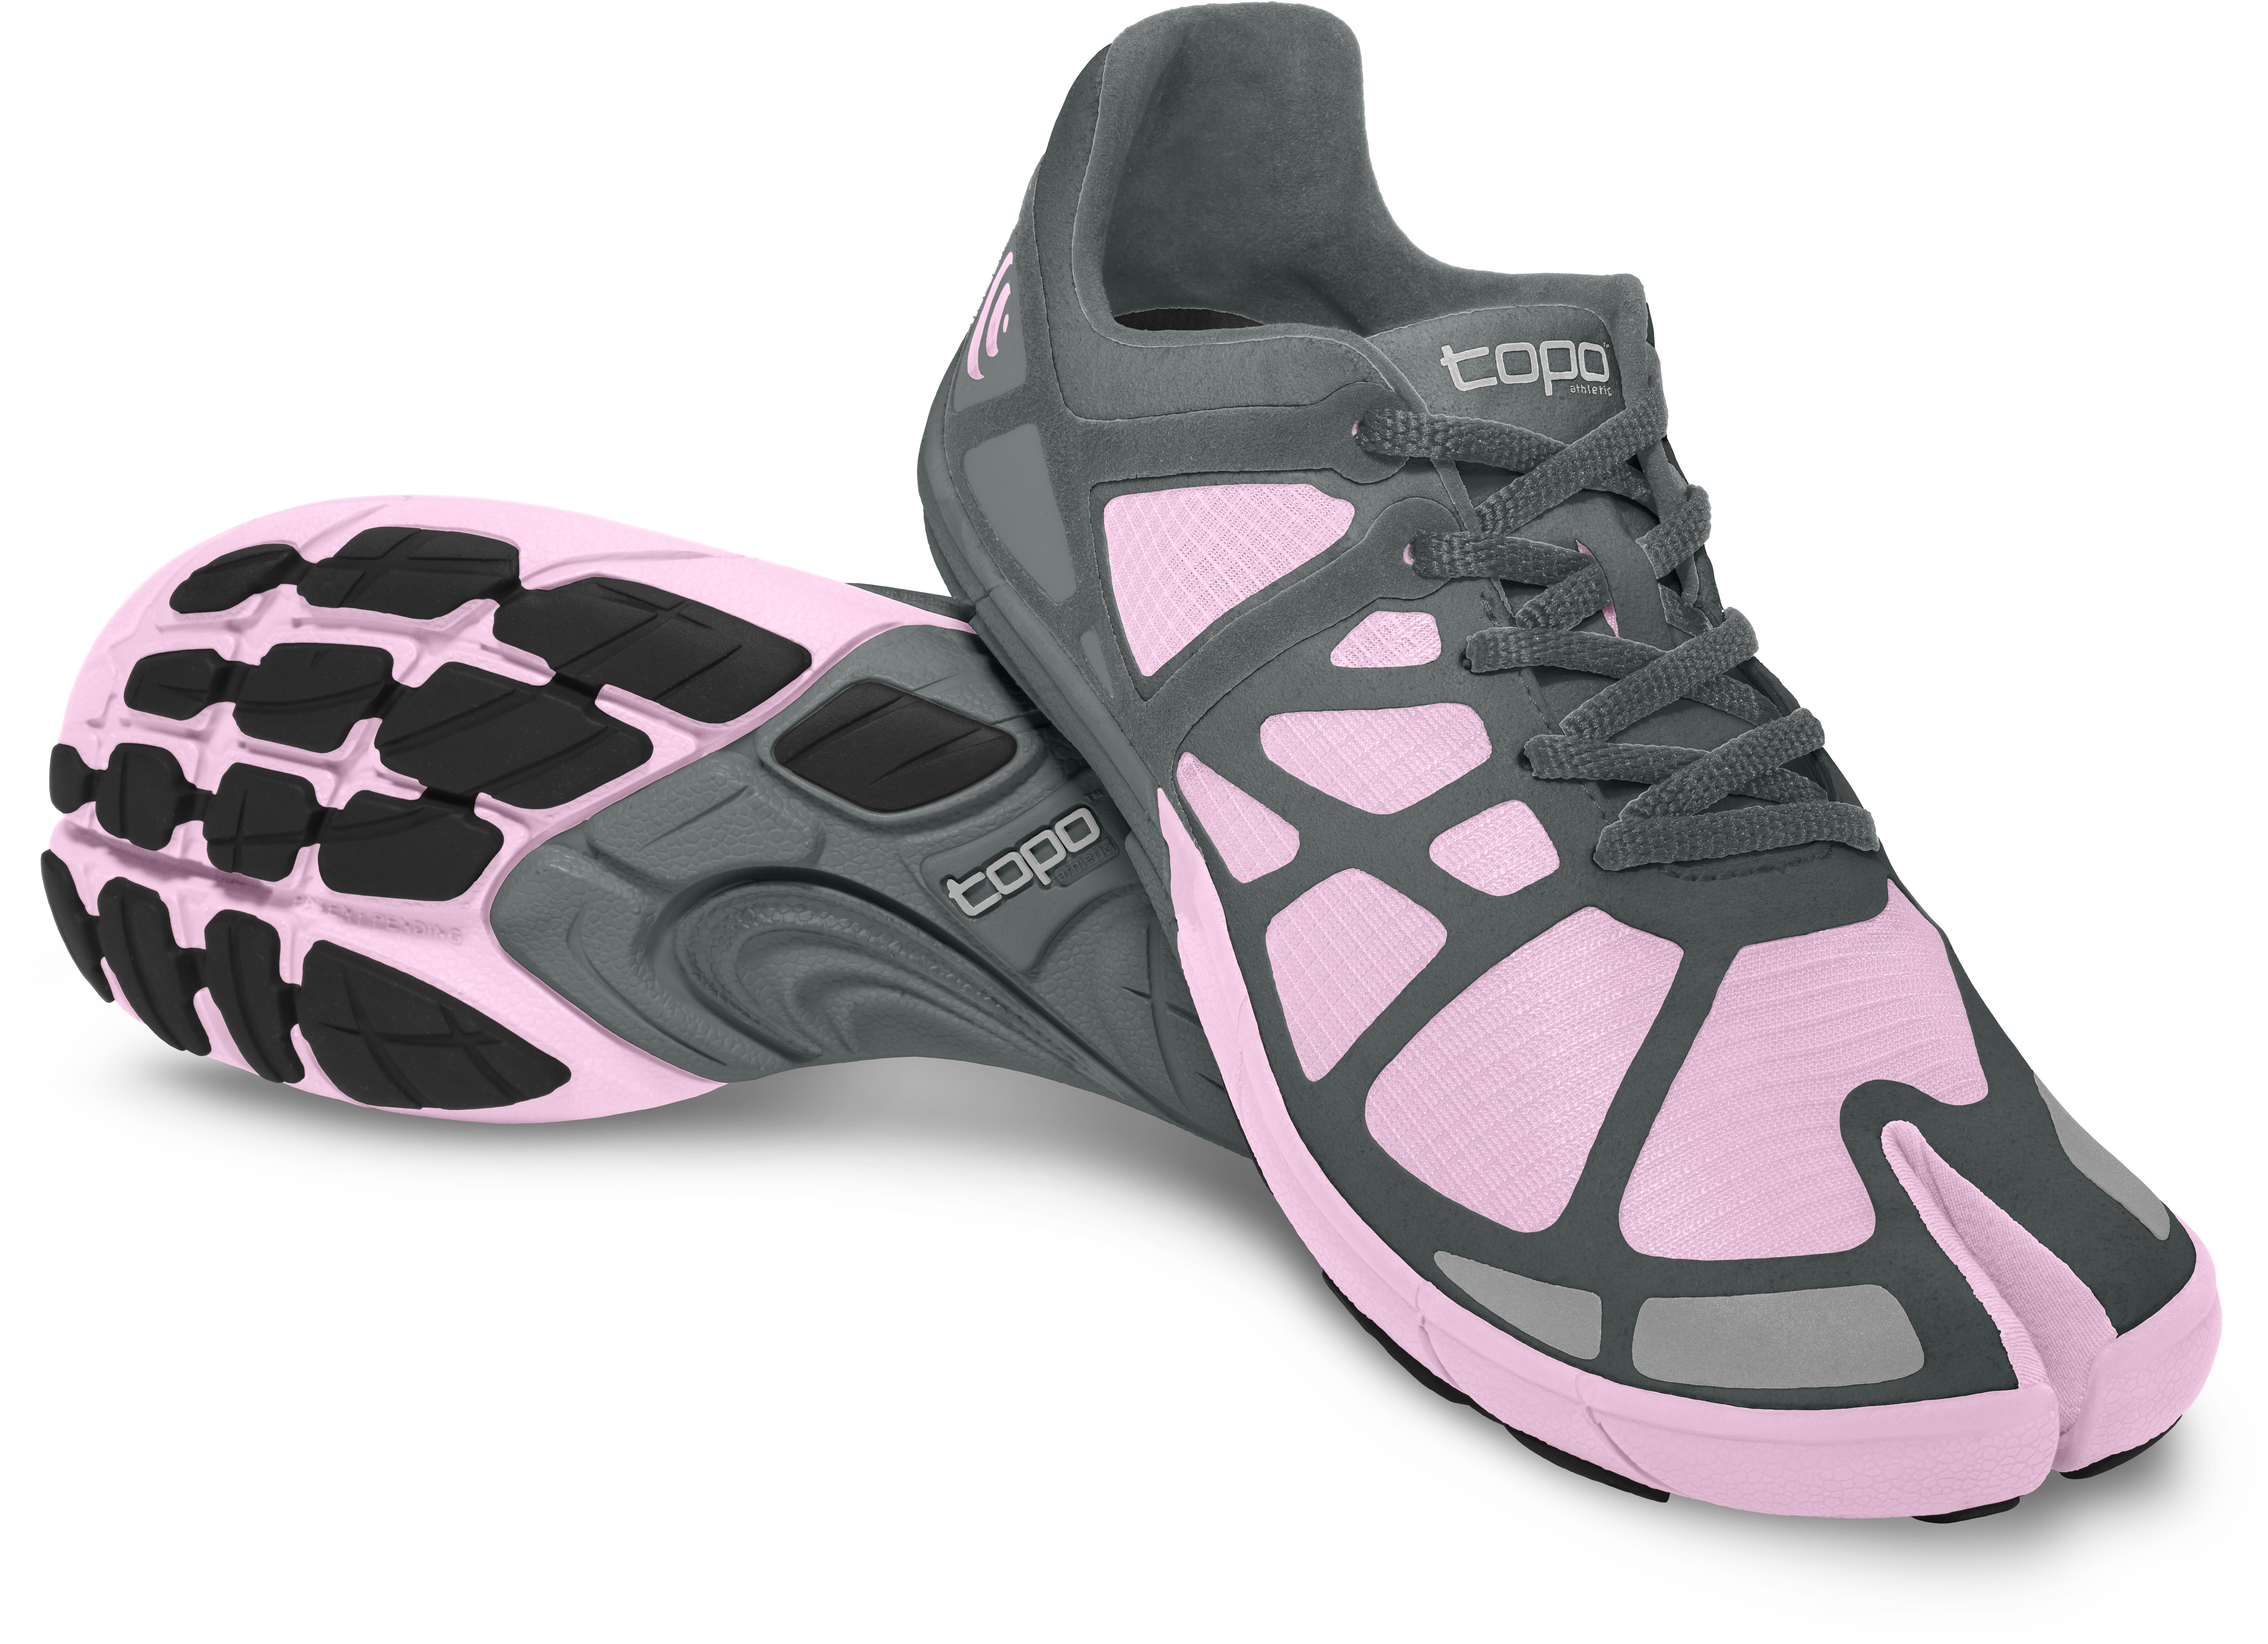 To boldly toe: ToPo Athletic split foot trainers are more science than  gimmick, The Independent